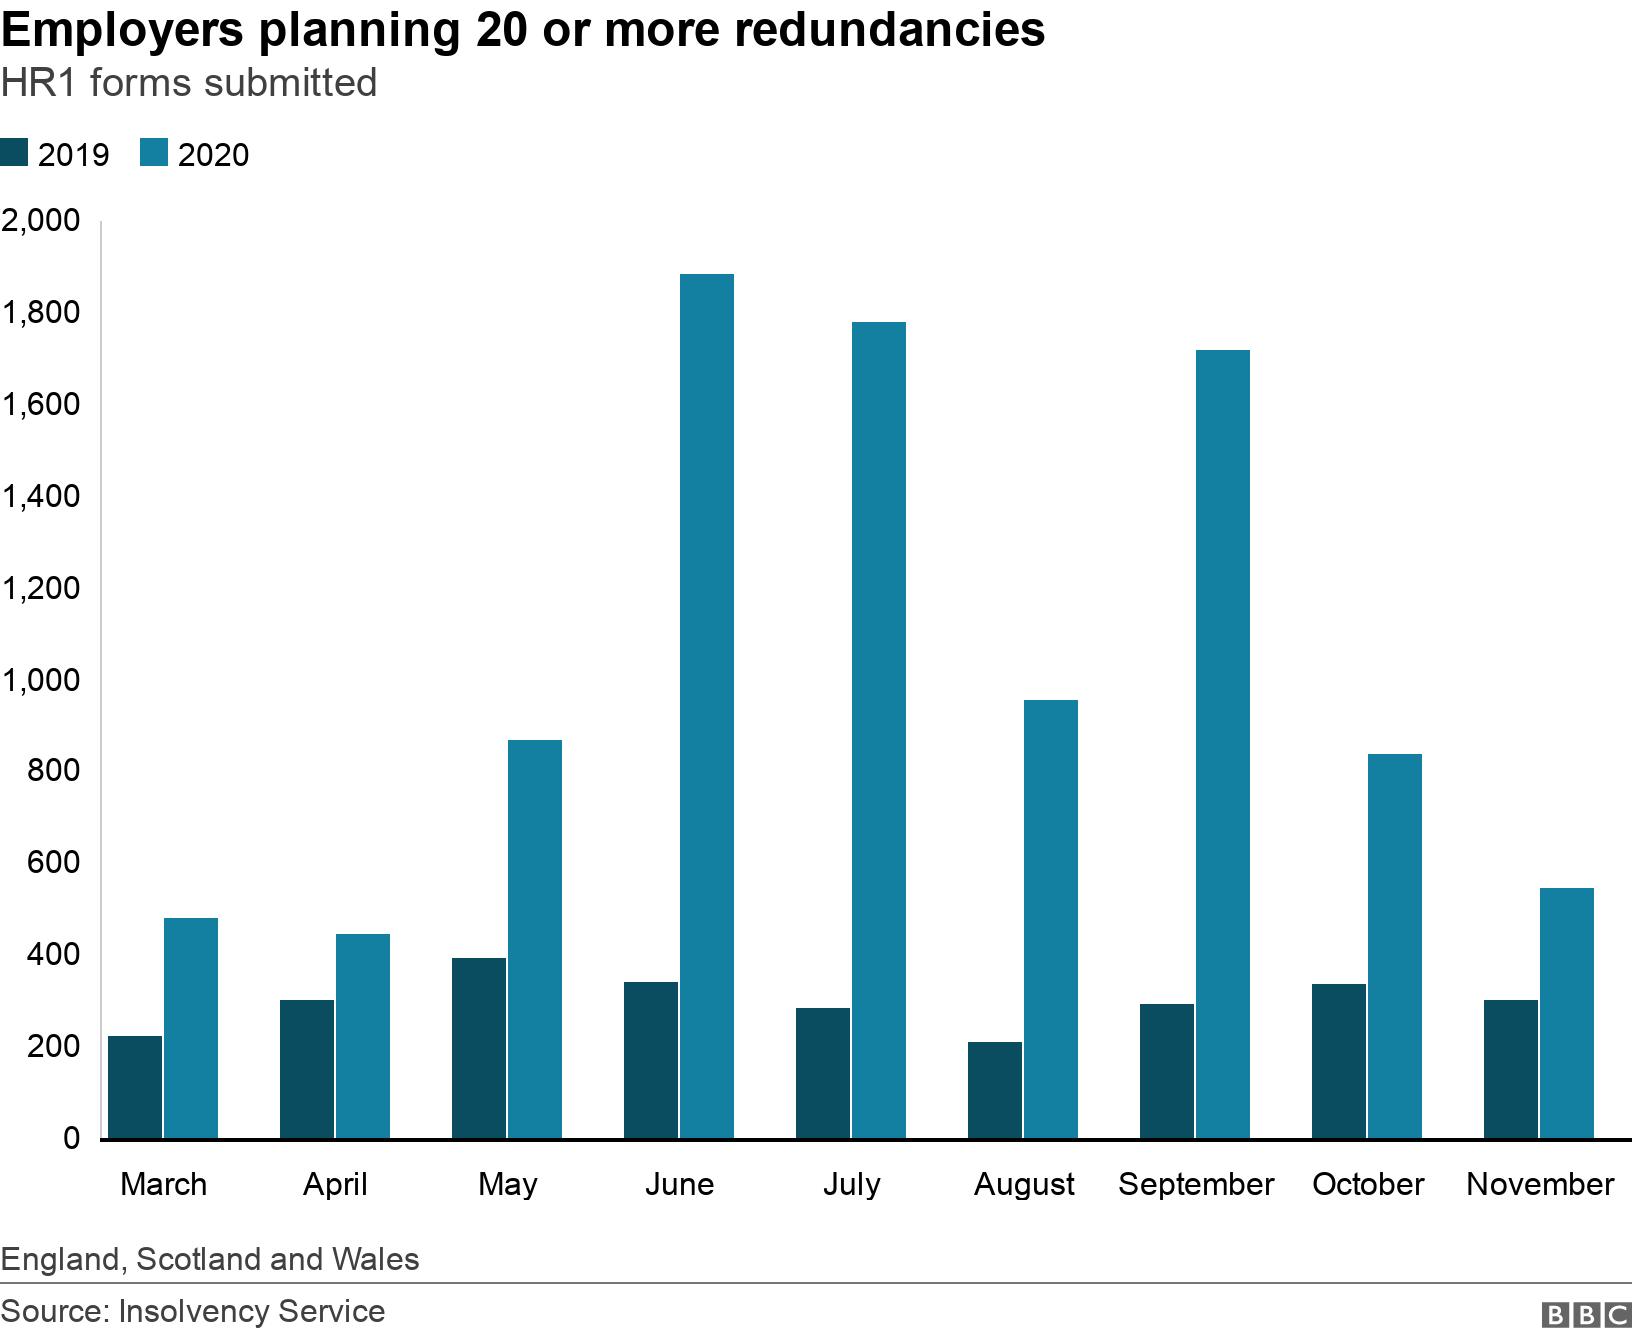 Employers planning 20 or more redundancies. HR1 forms submitted. Graph of the number of HR1 forms notifying redundancy plans submitted by month from March to November 2020 with 2019 figures for comparison England, Scotland and Wales.